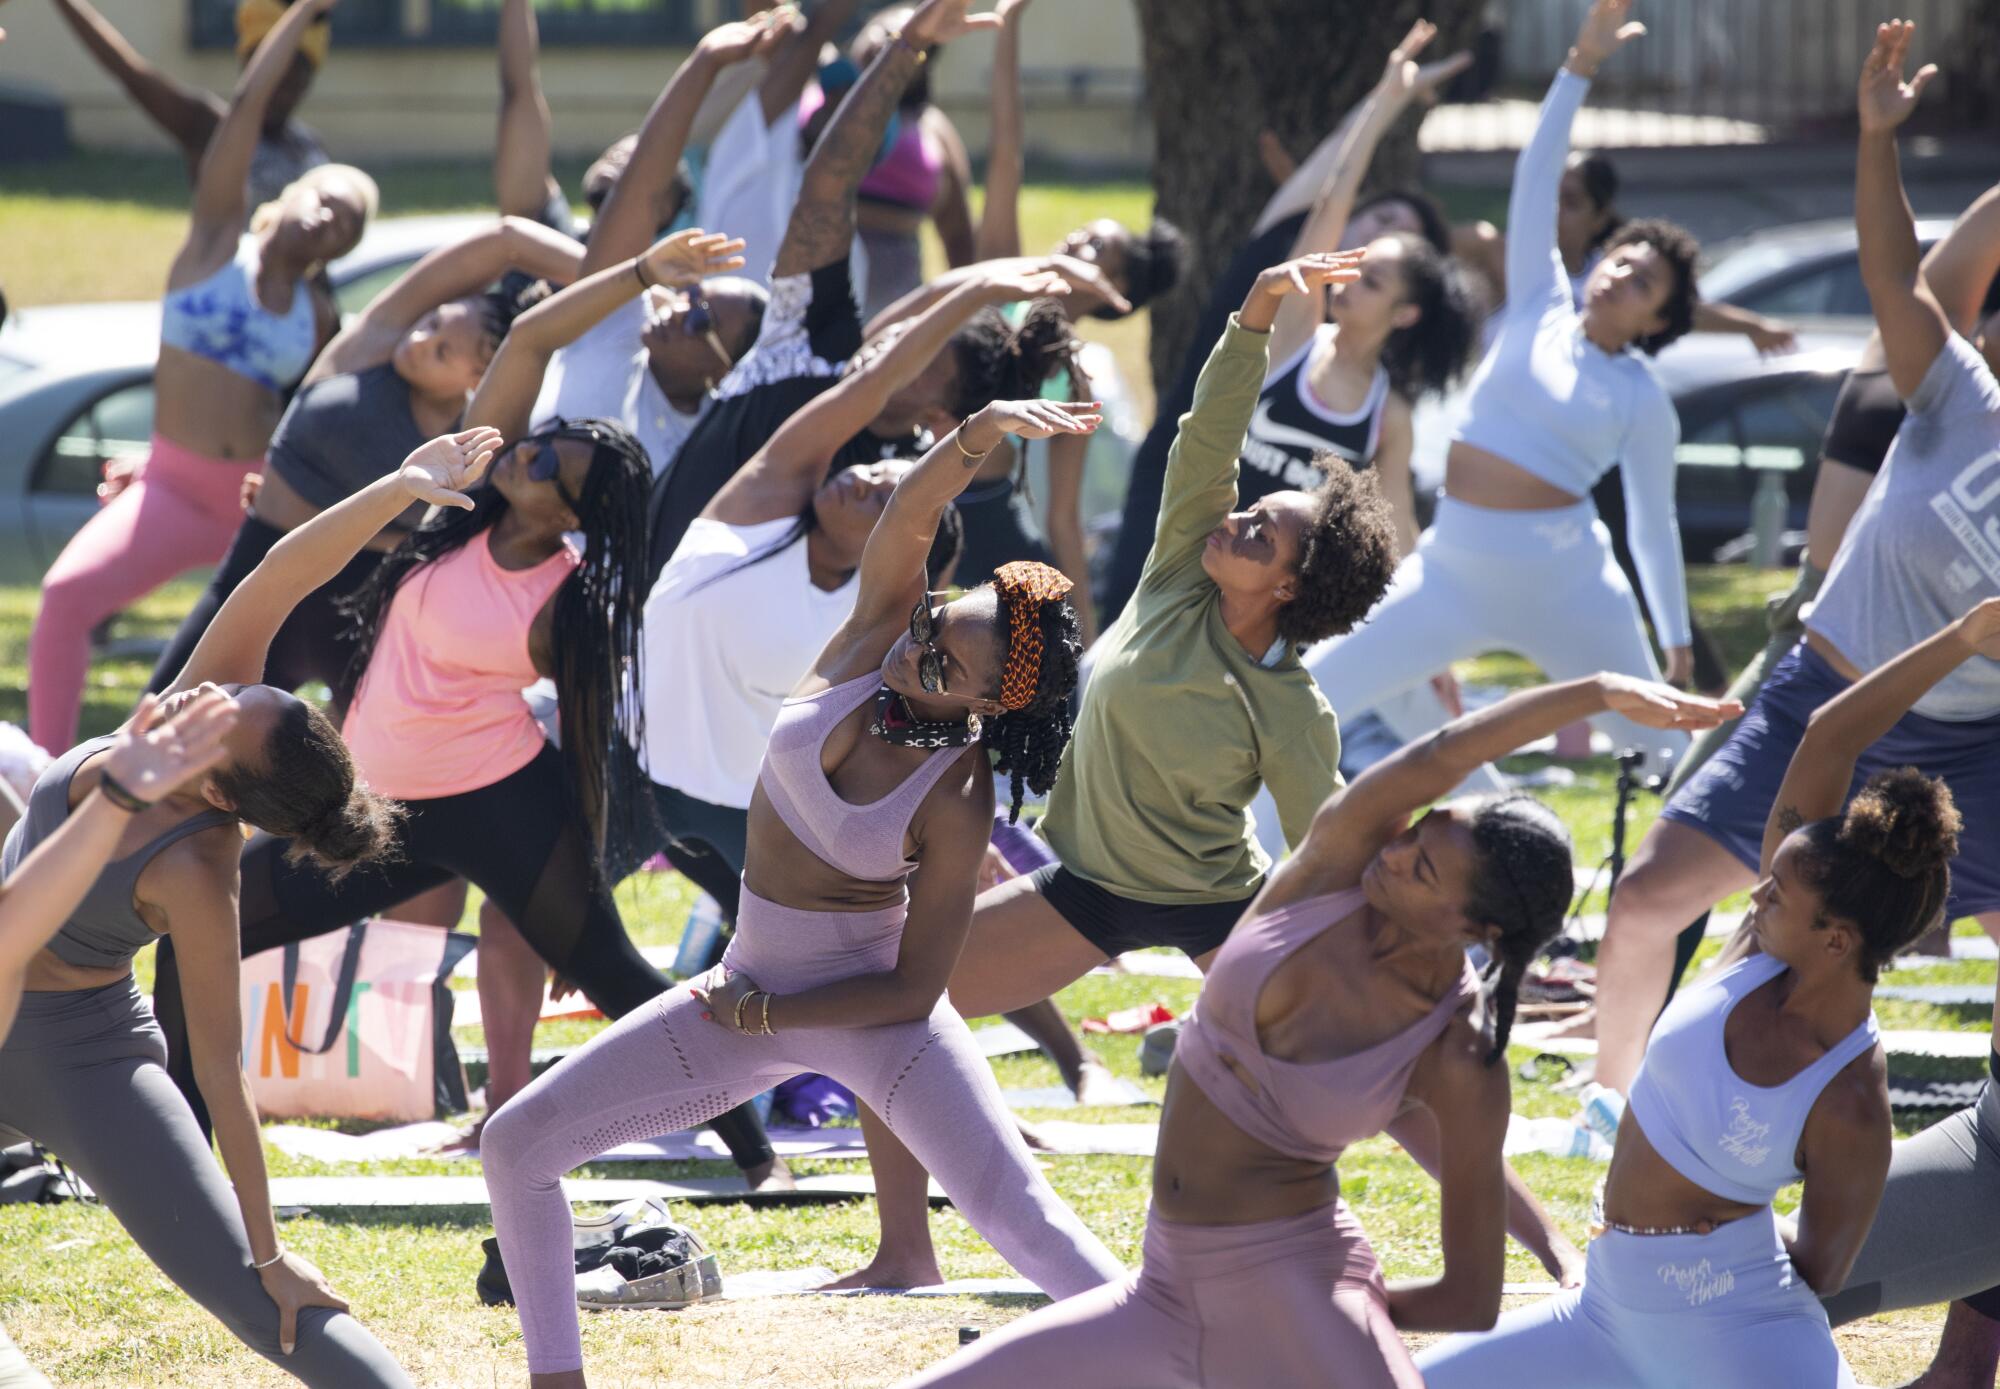 A group of people do yoga in a park.